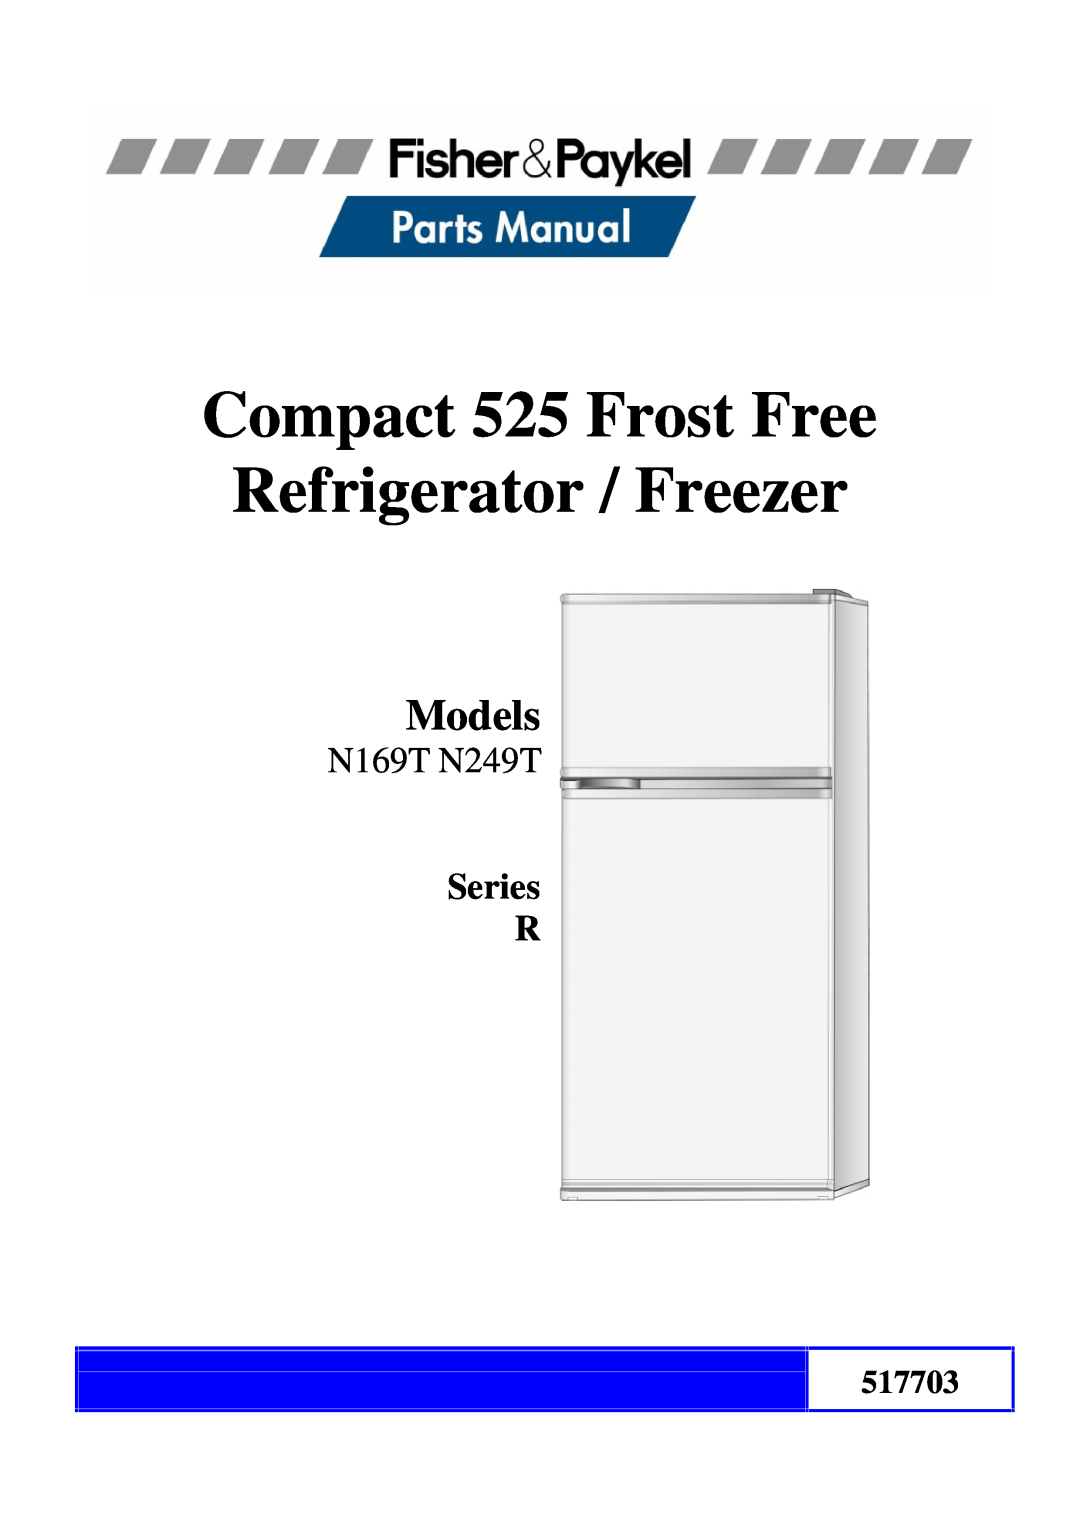 Fisher & Paykel manual Compact 525 Frost Free Refrigerator / Freezer, Models, N169T N249T, Series R, 517703 